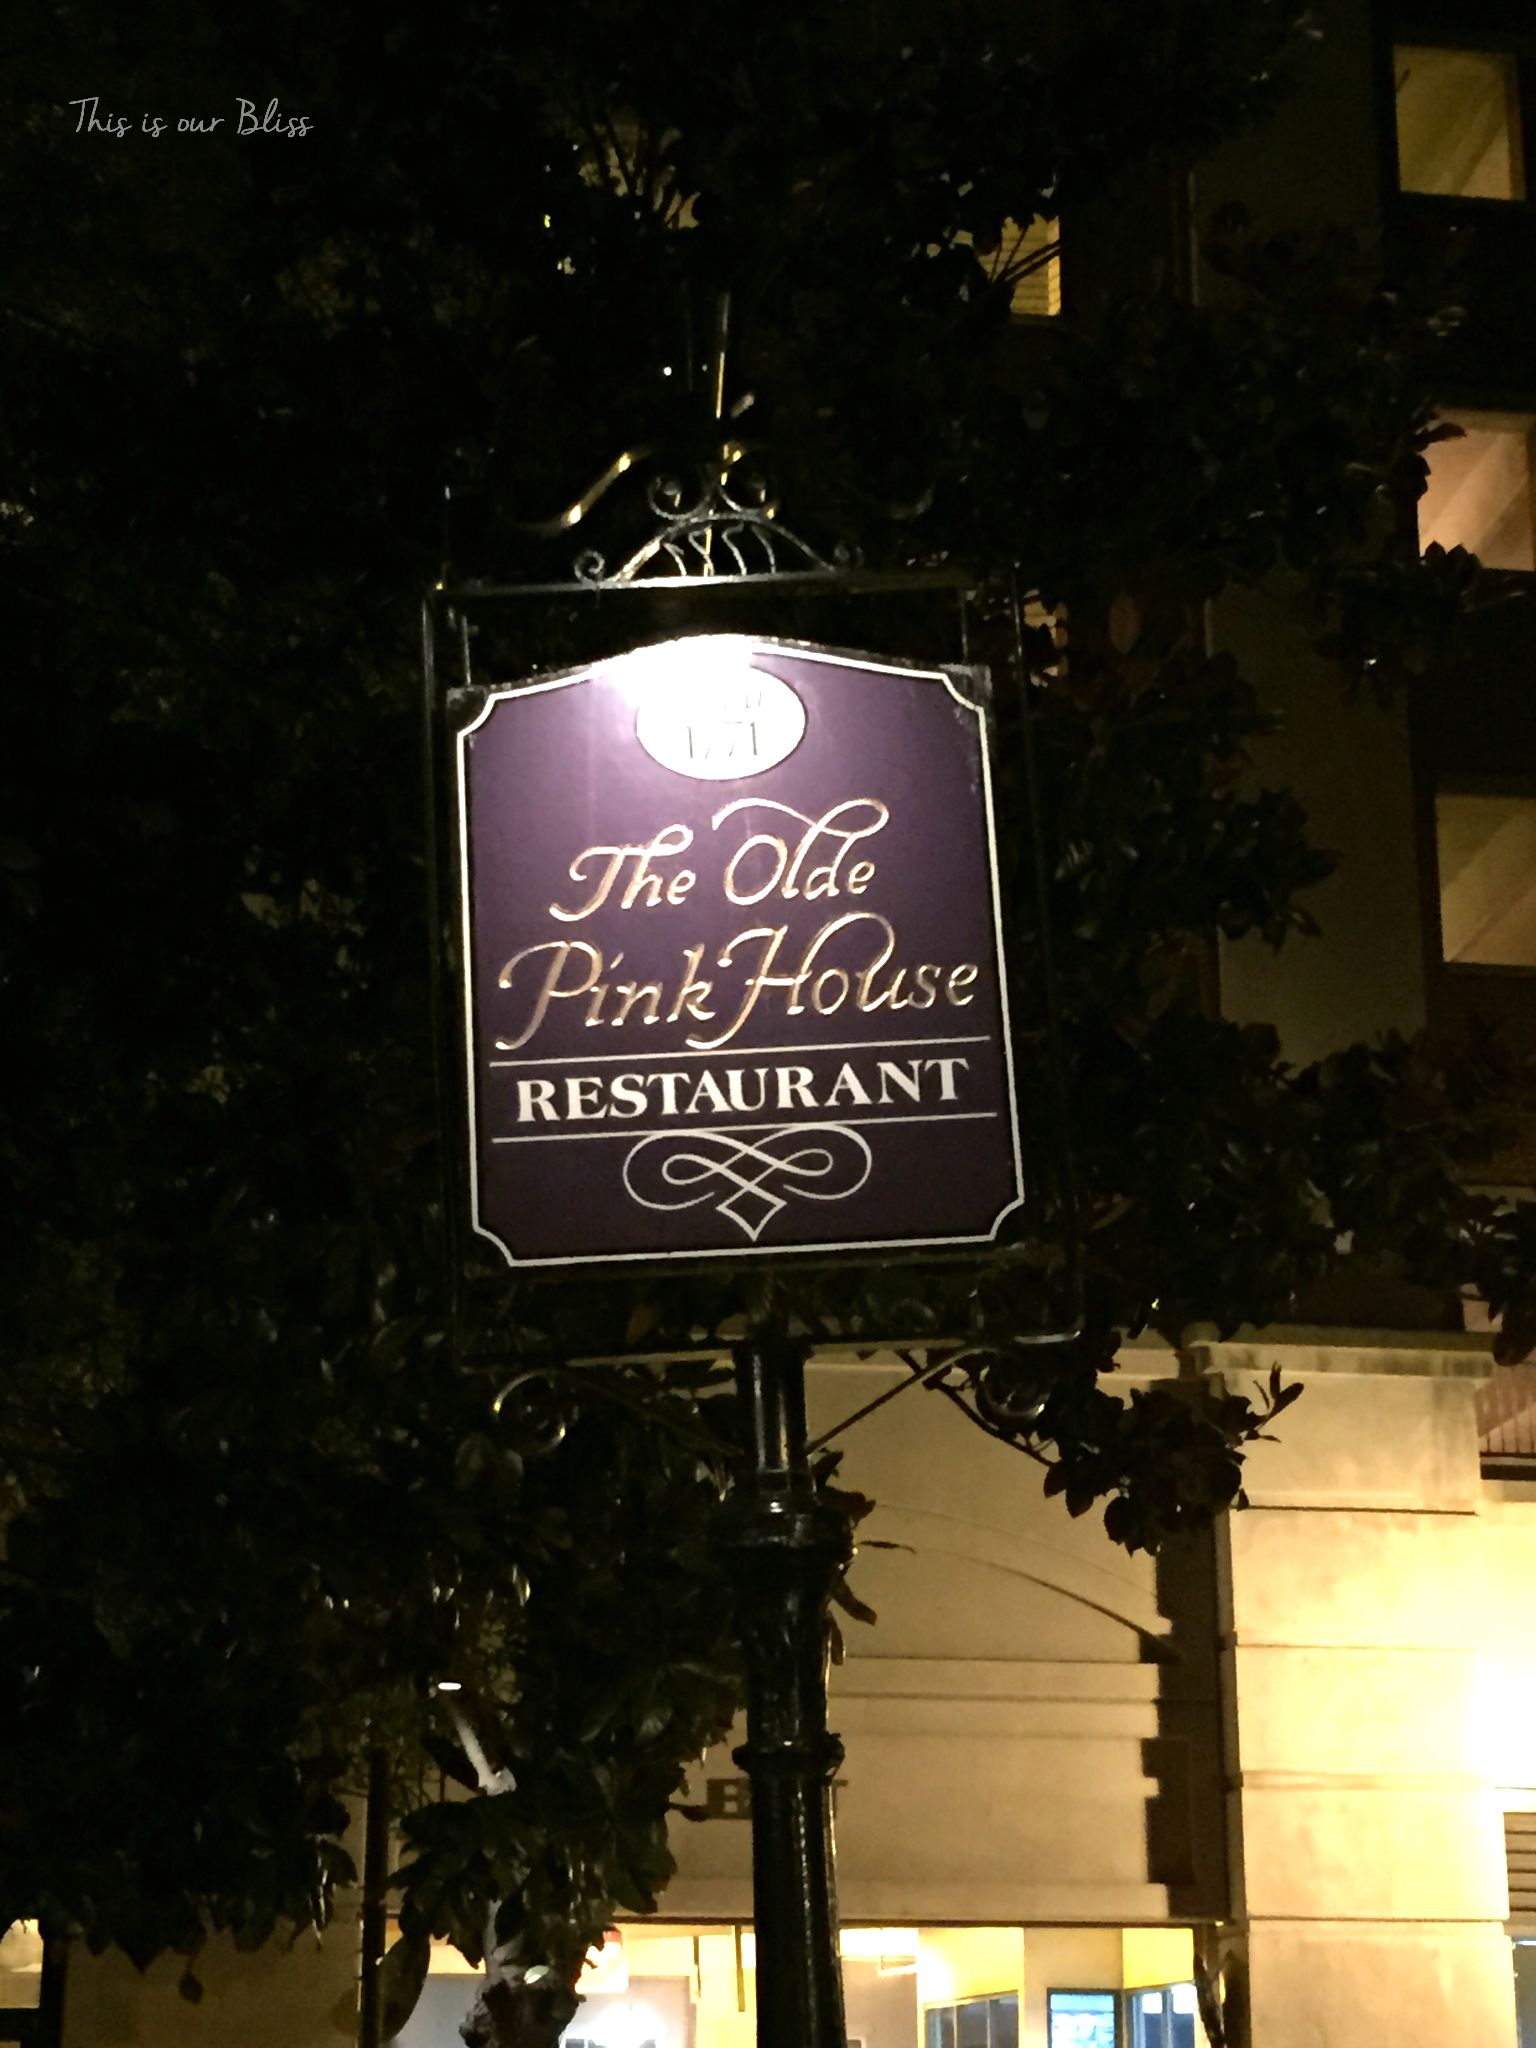 The Olde Pink House Restaurant - Savannah GA - This is our Bliss